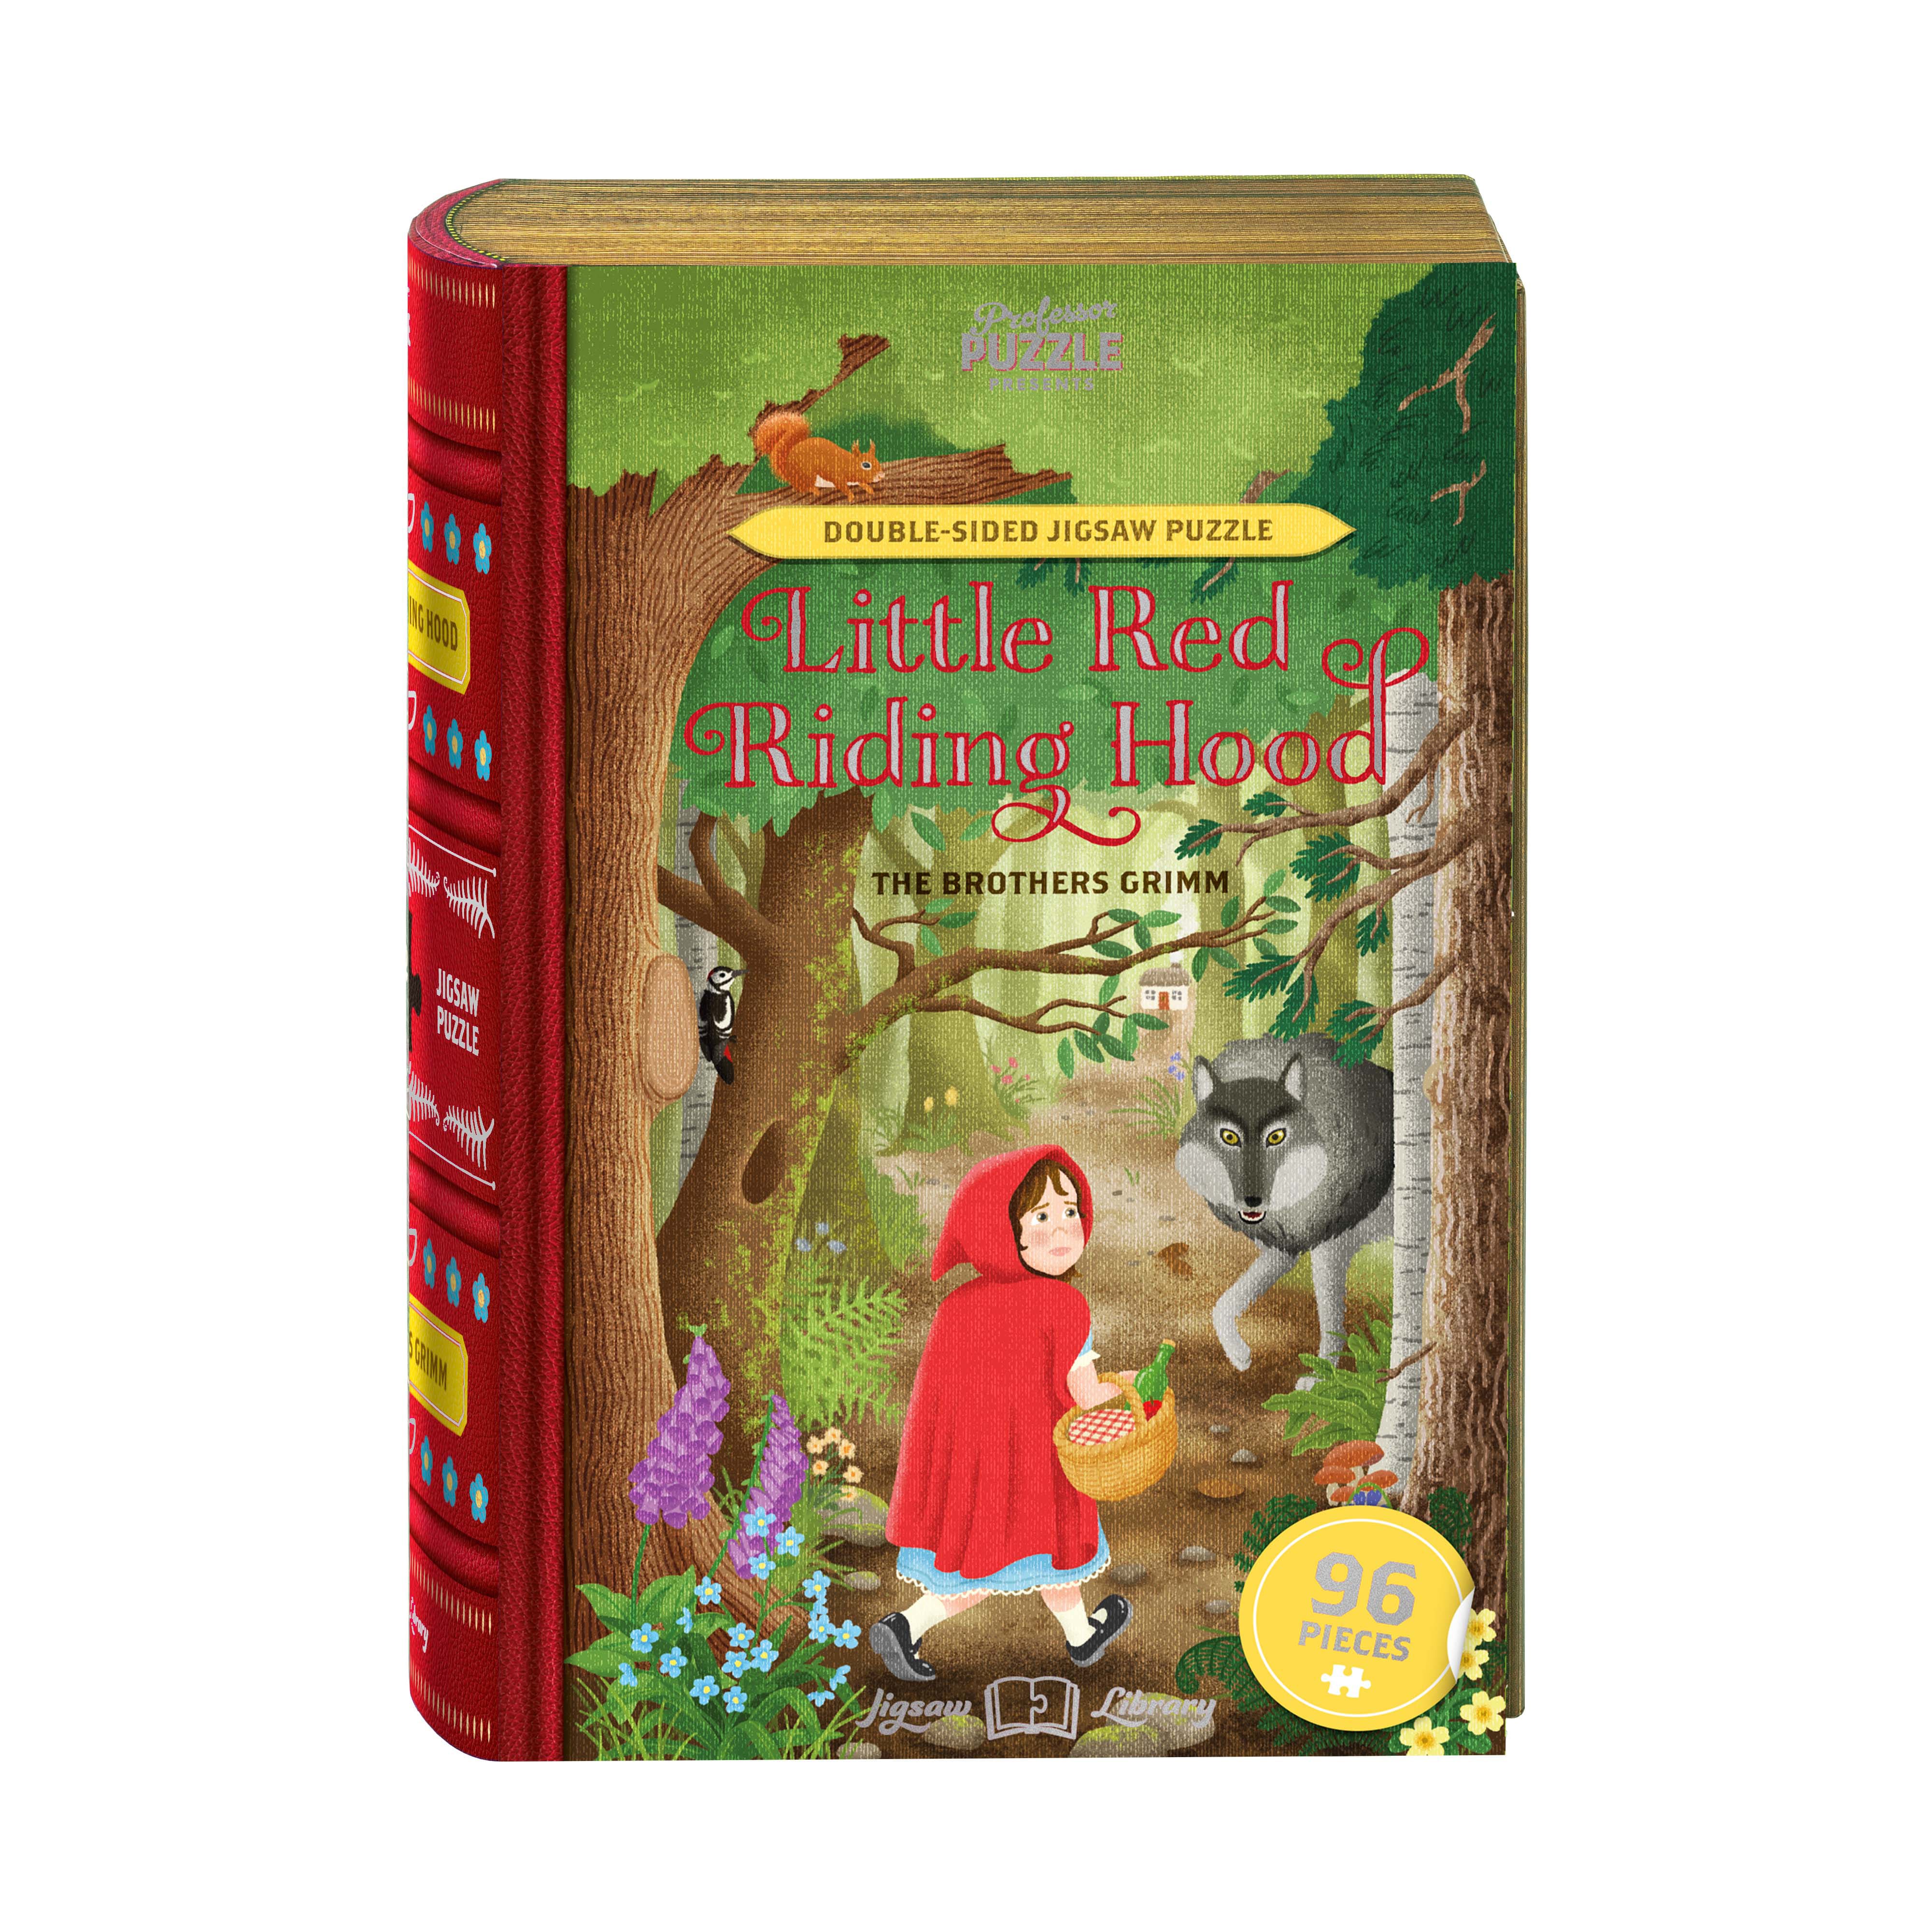 The Brothers Grimm&#x27;s Little Red Riding Hood Double-Sided Jigsaw Puzzle: 96 Pcs